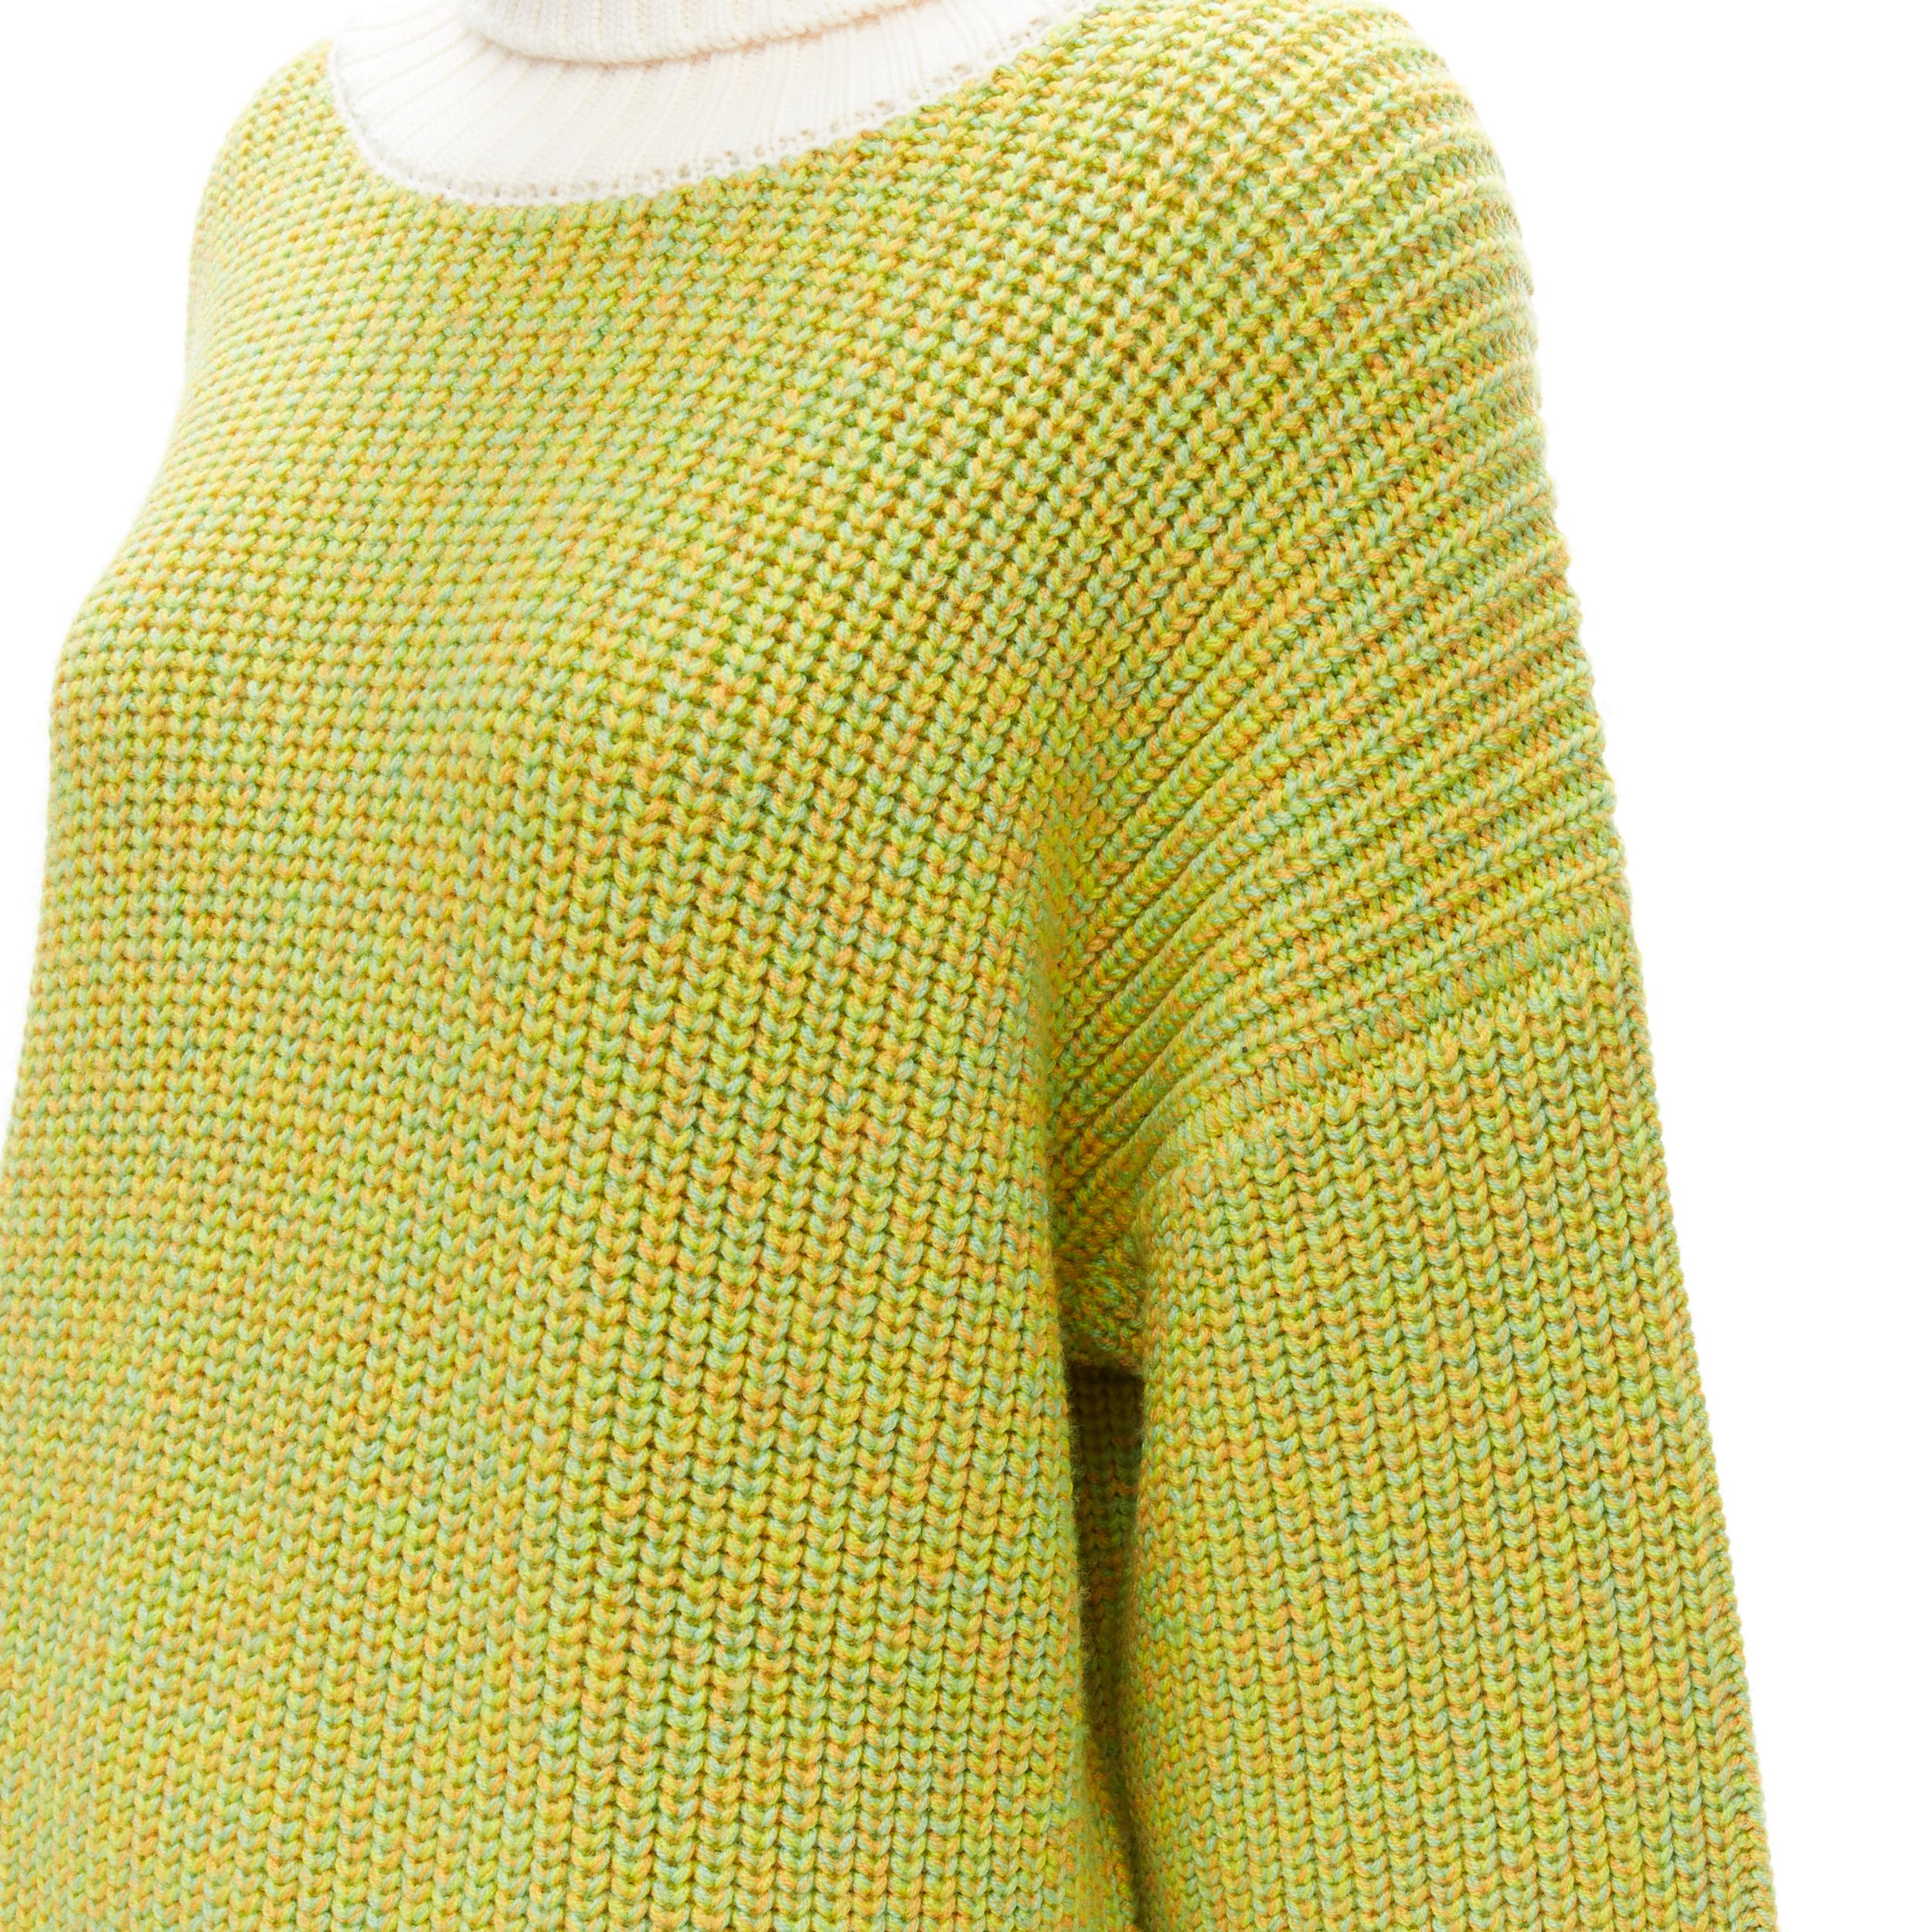 TIBI 100% merino wool lime yellow contrast rolled turtleneck sweater M/L For Sale 2